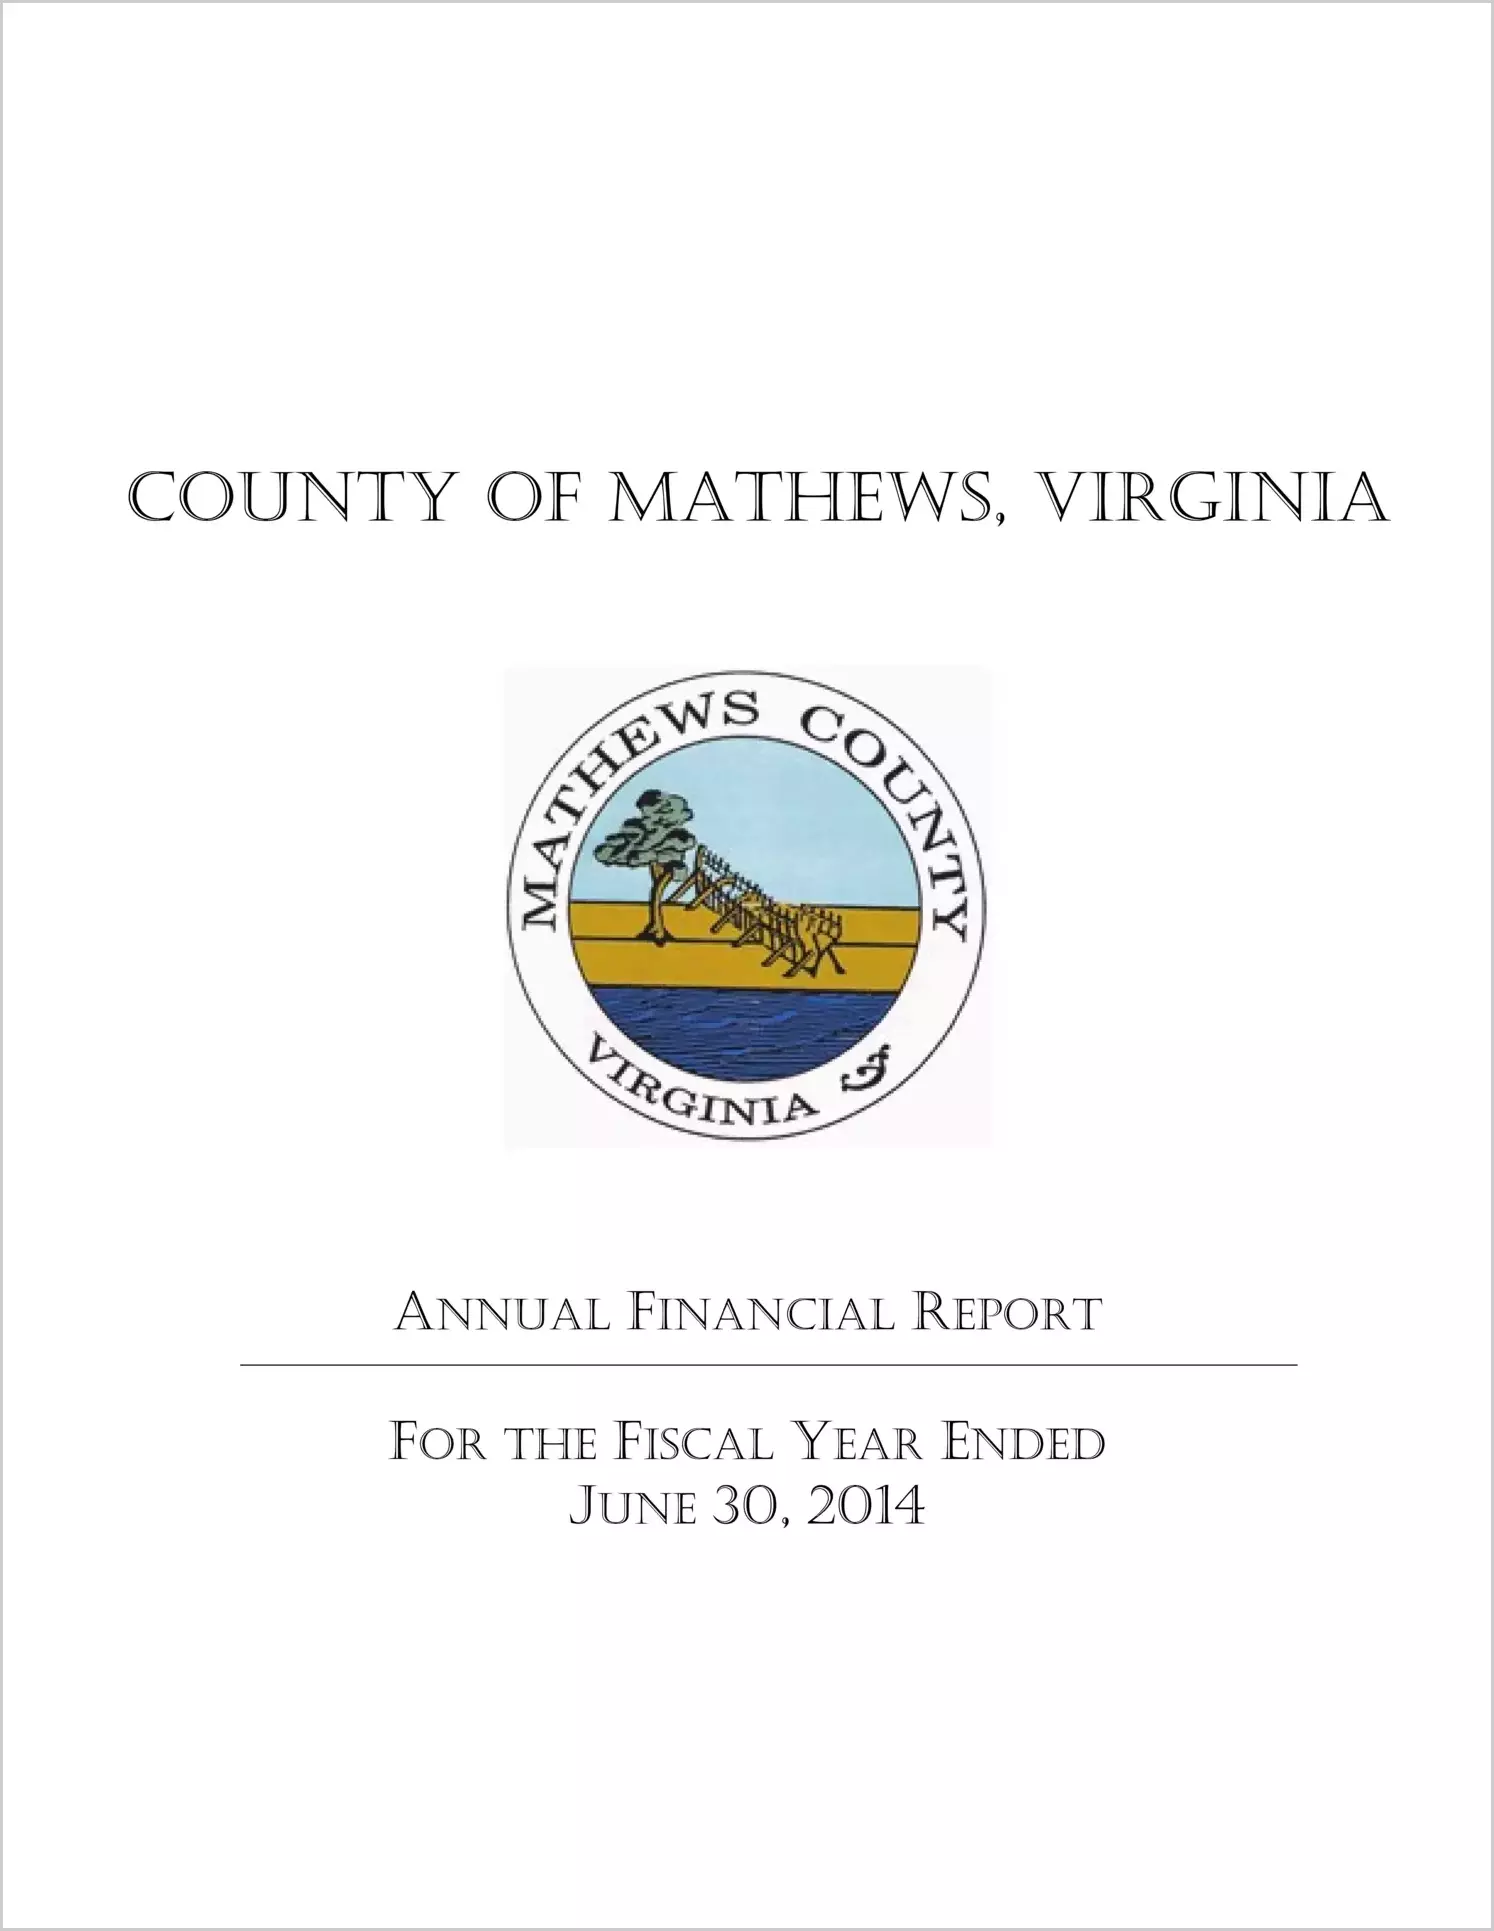 2014 Annual Financial Report for County of Mathews